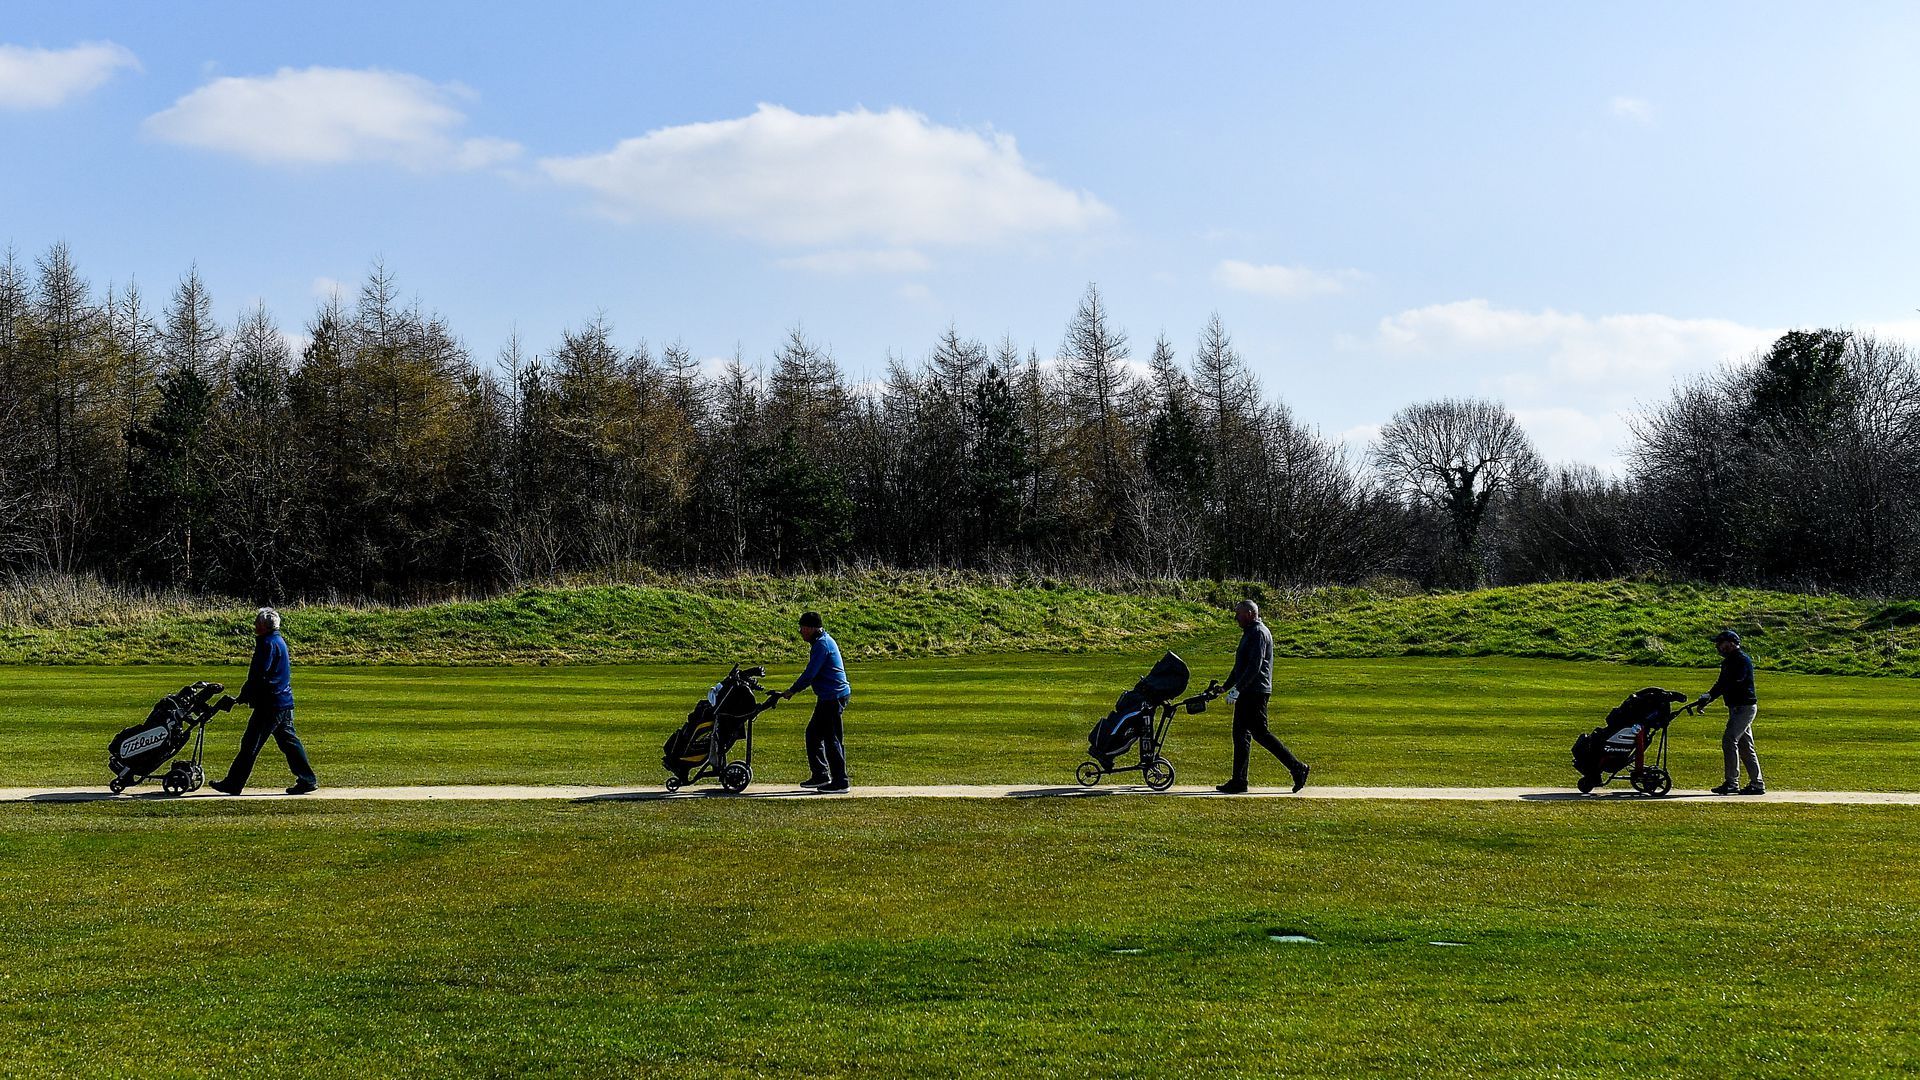 Members of Craddockstown Golf Club in Kildare, Ireland, enjoy a round of golf while practicing social distancing.